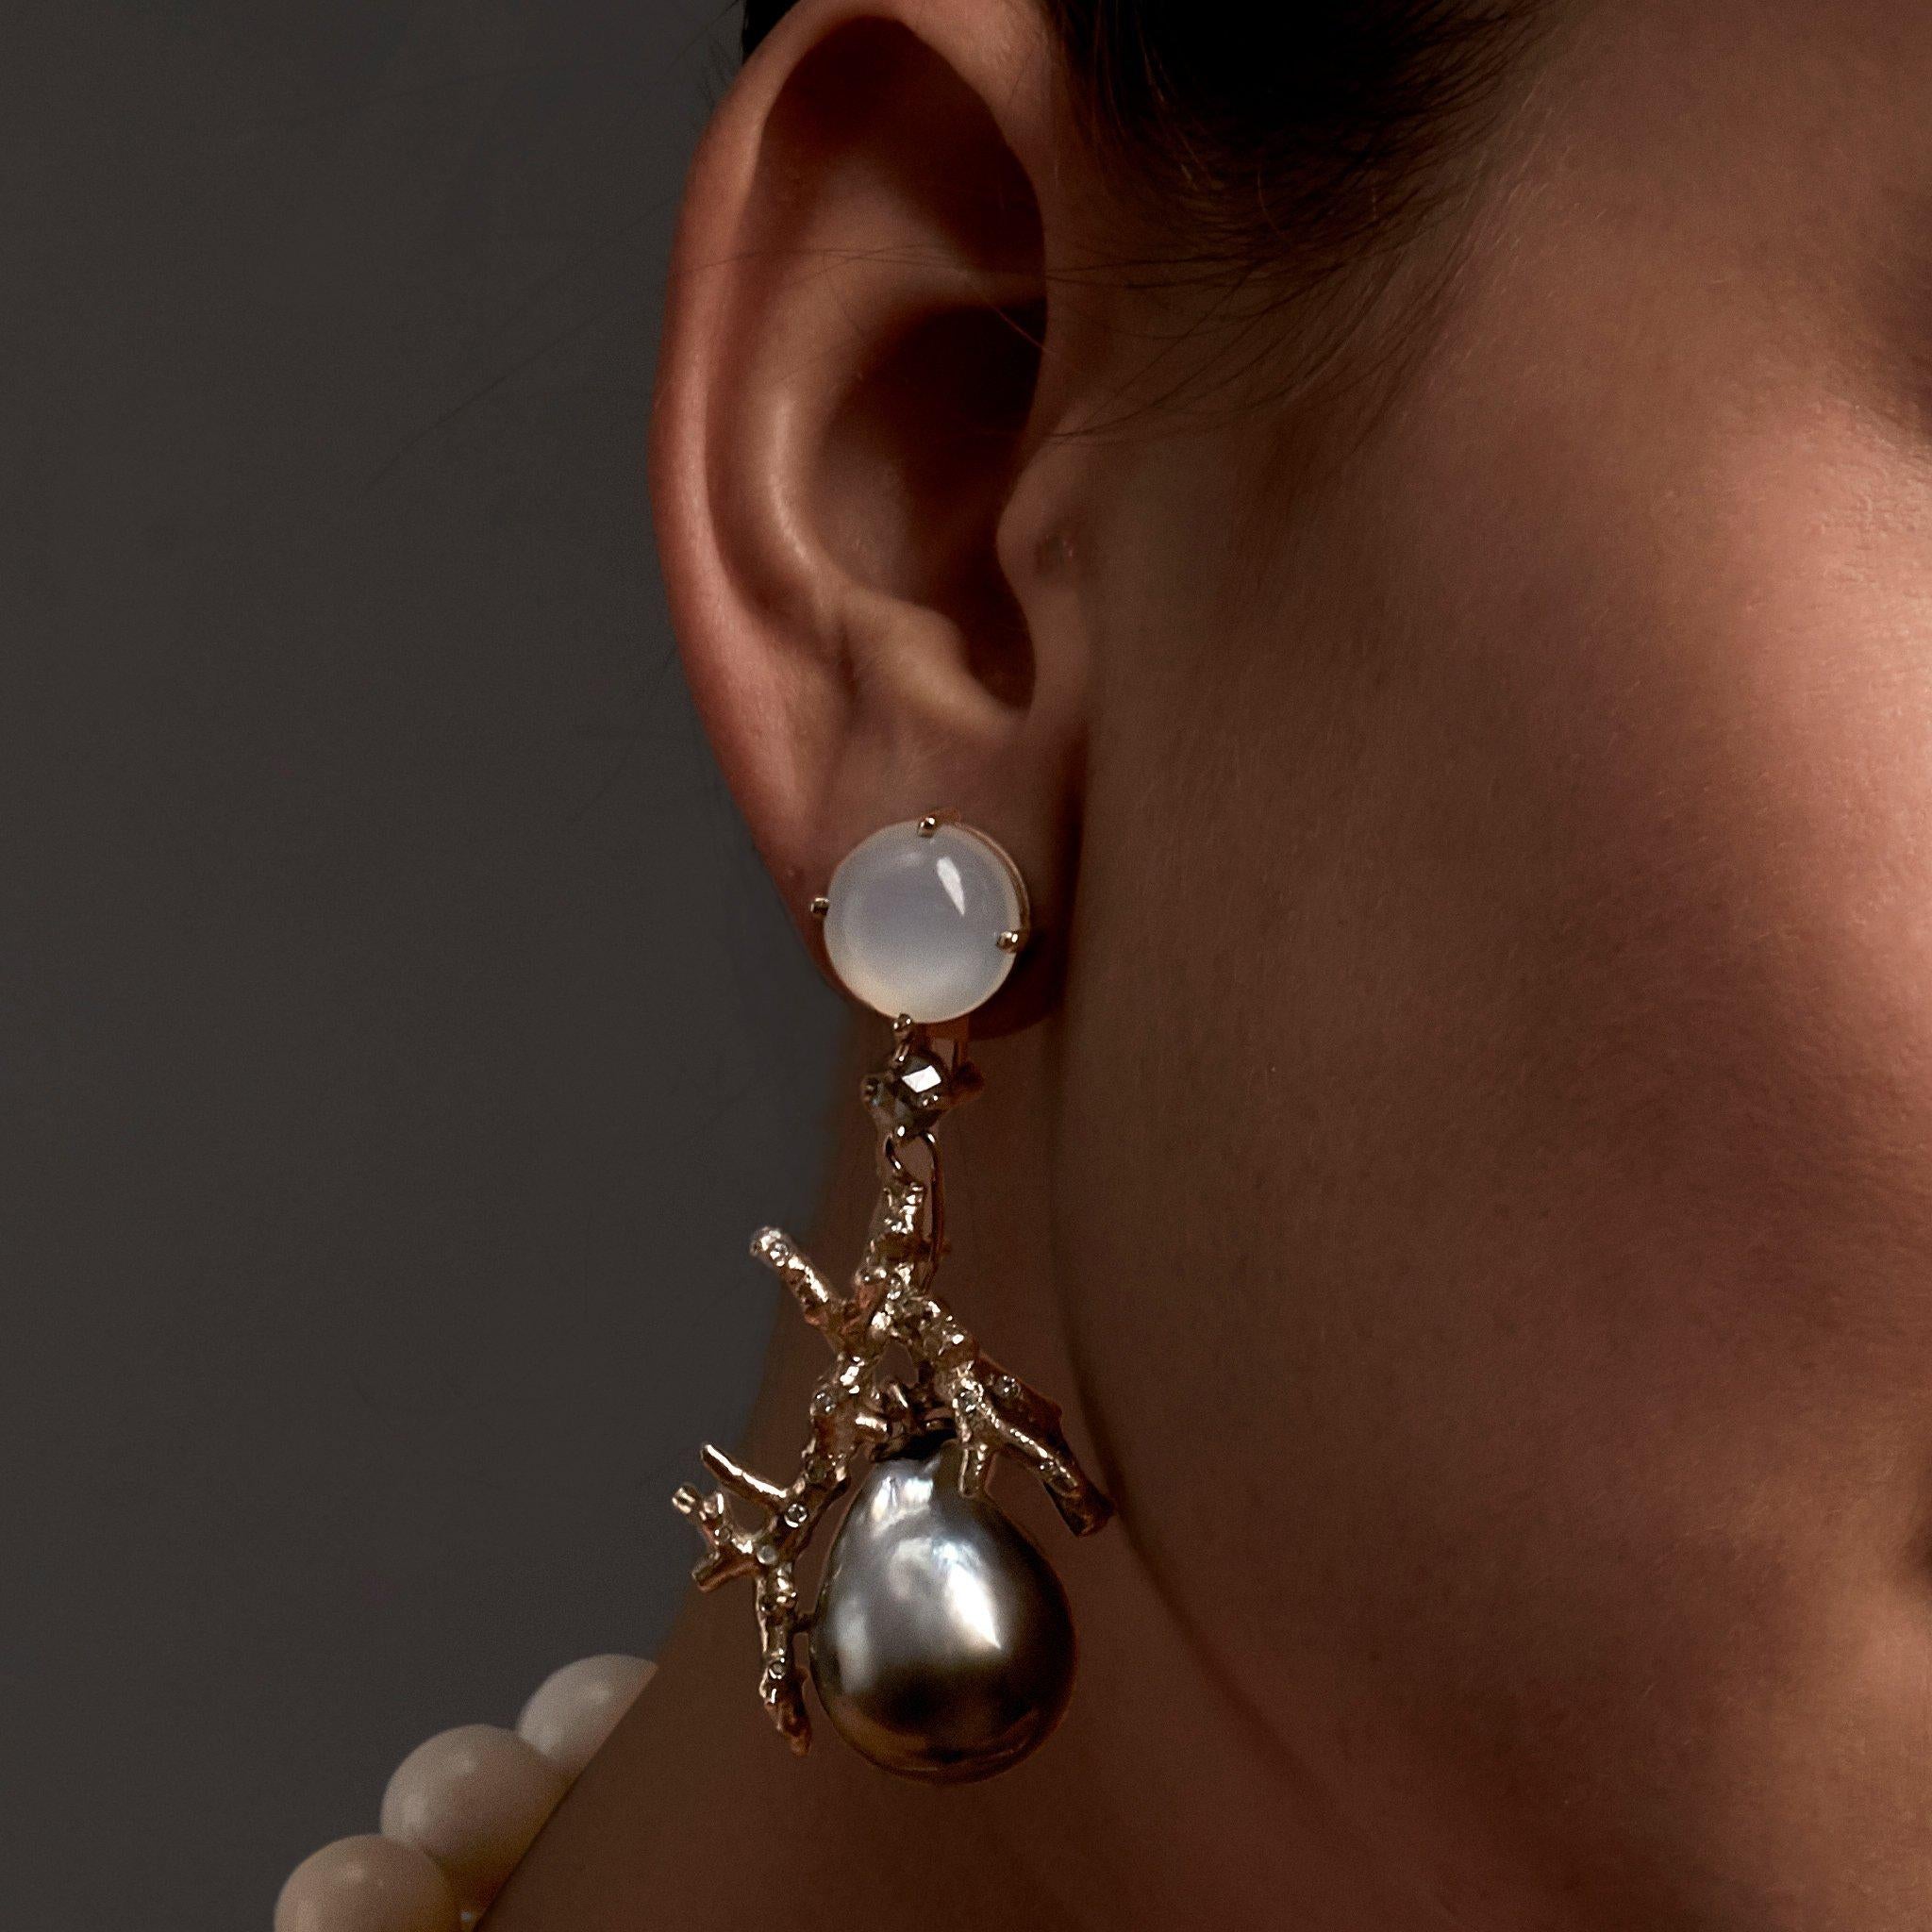 Elegant statement earrings feature opposites of cabochon-cut, dark grey and white moonstones married with rose-cut 